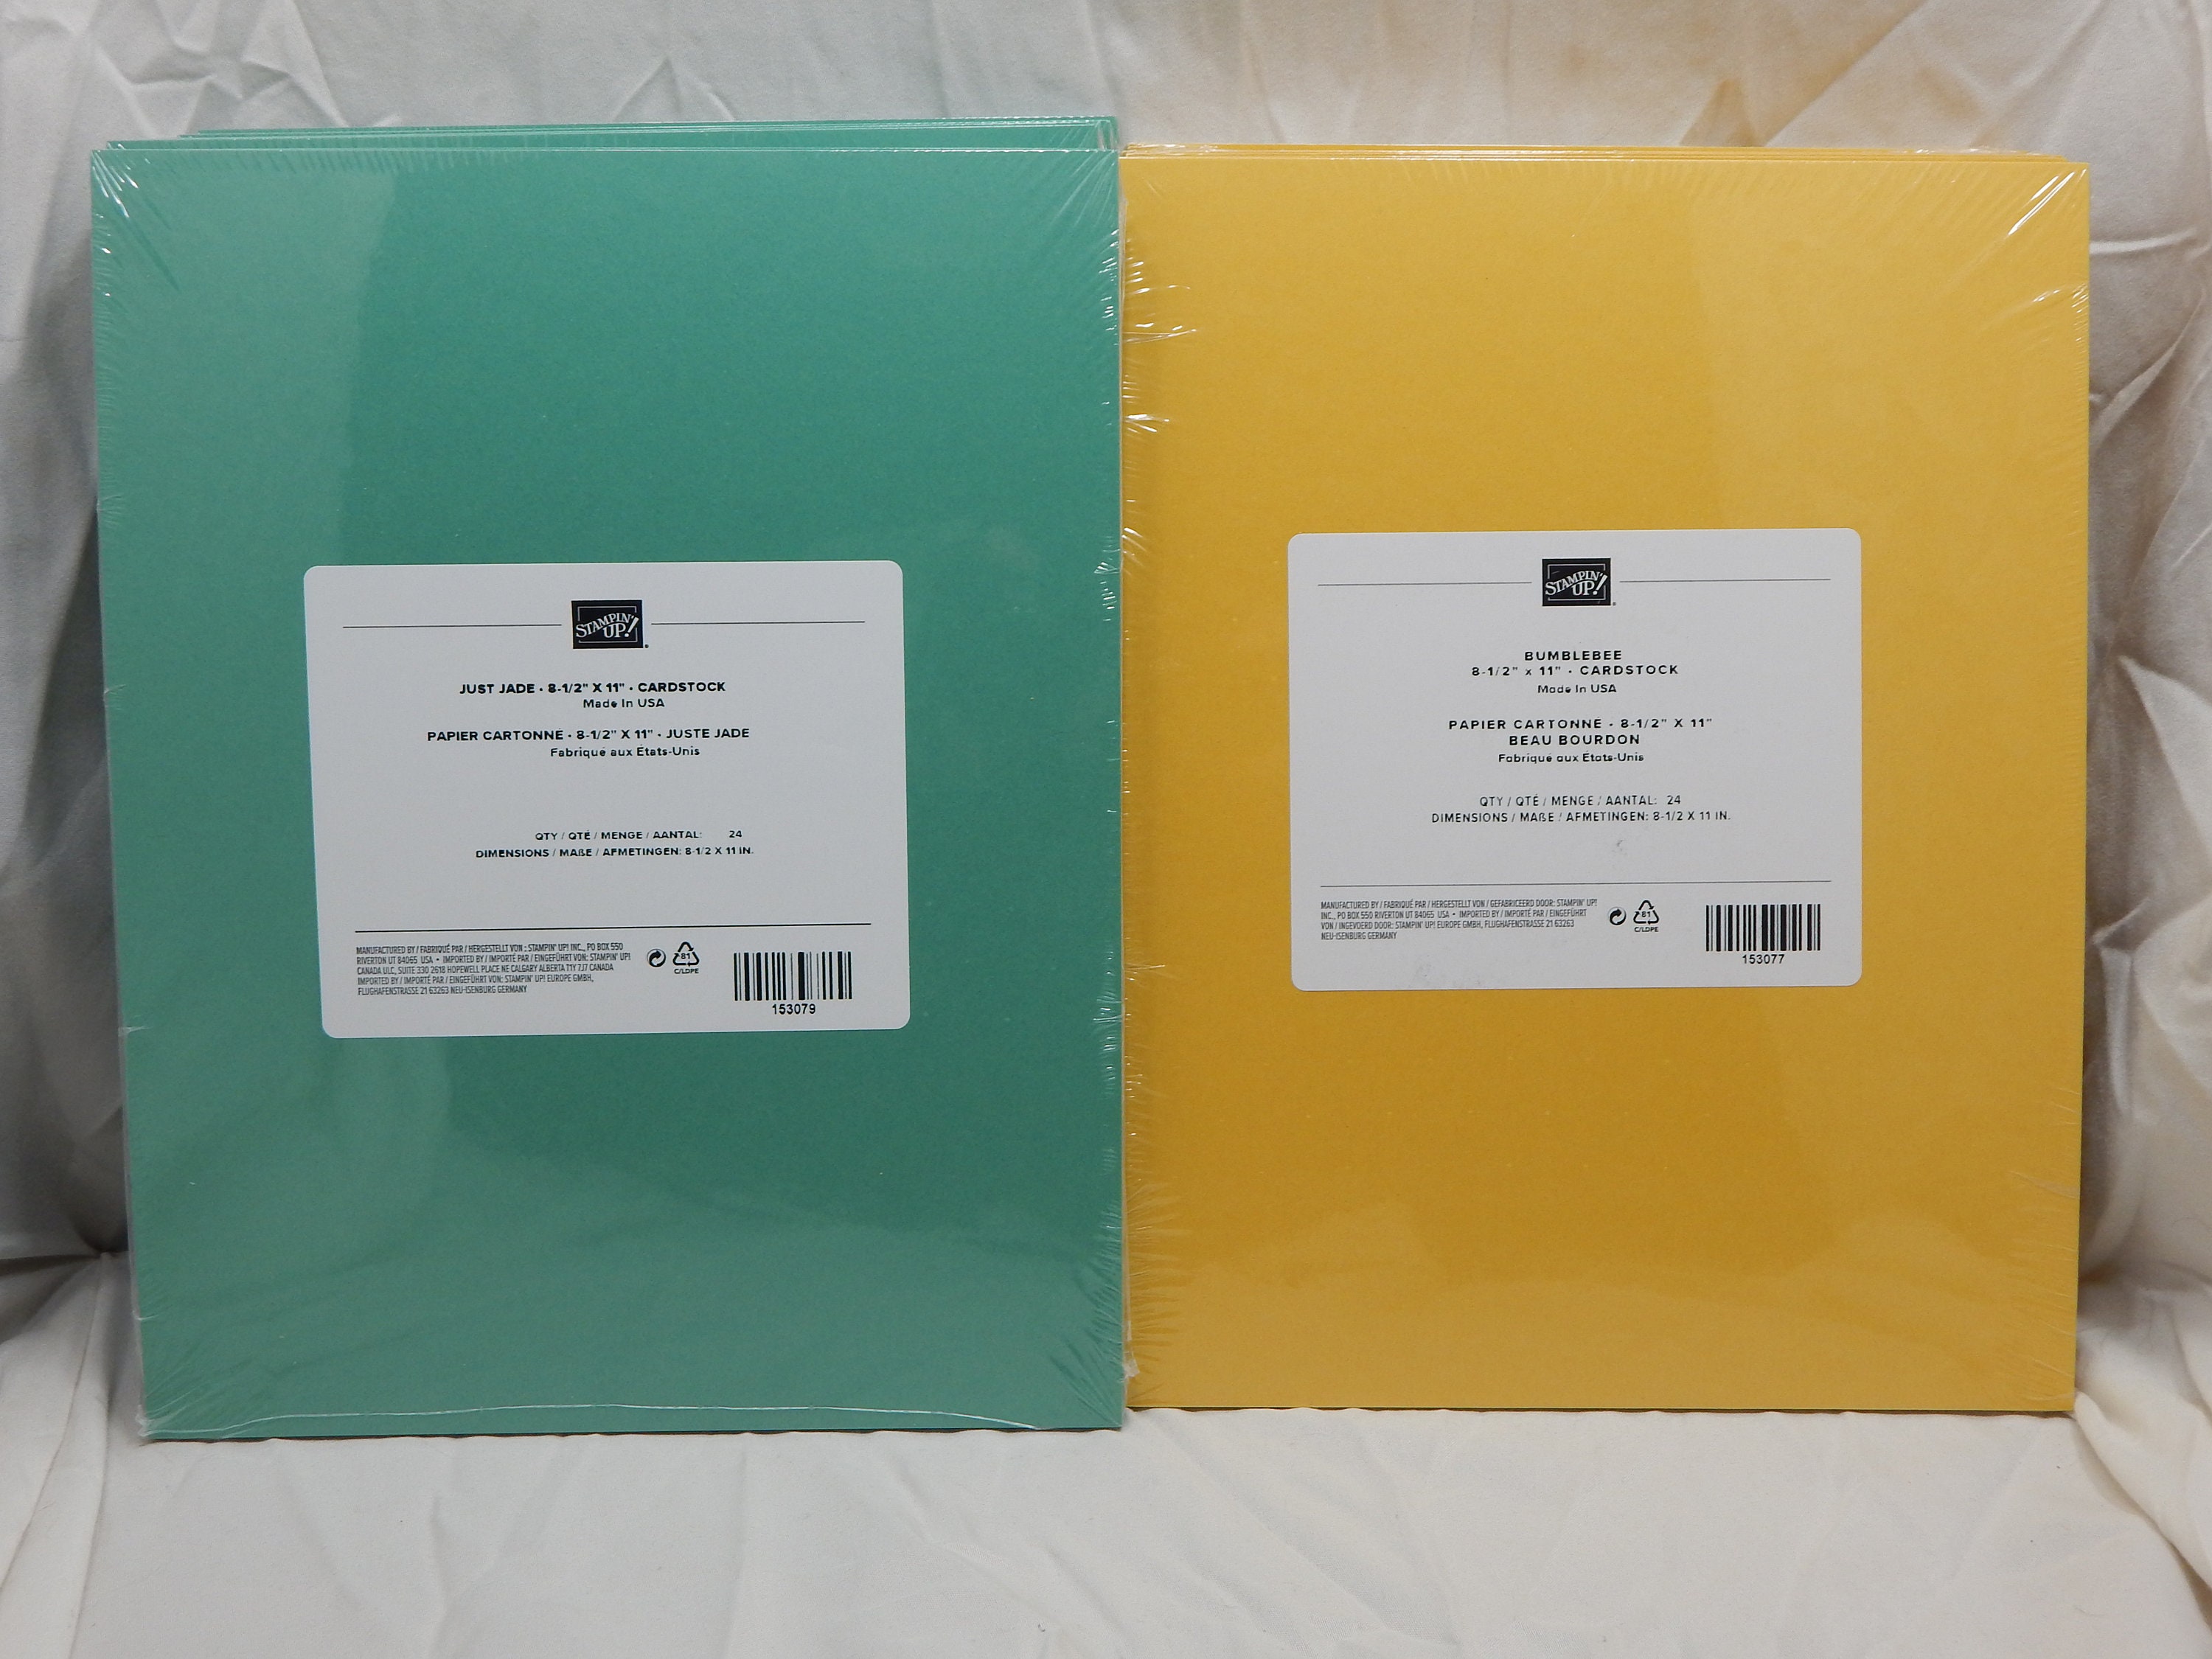 50 Sheet 8.5 x 11 Brown Smooth Cardstock Paper Pack by Park Lane